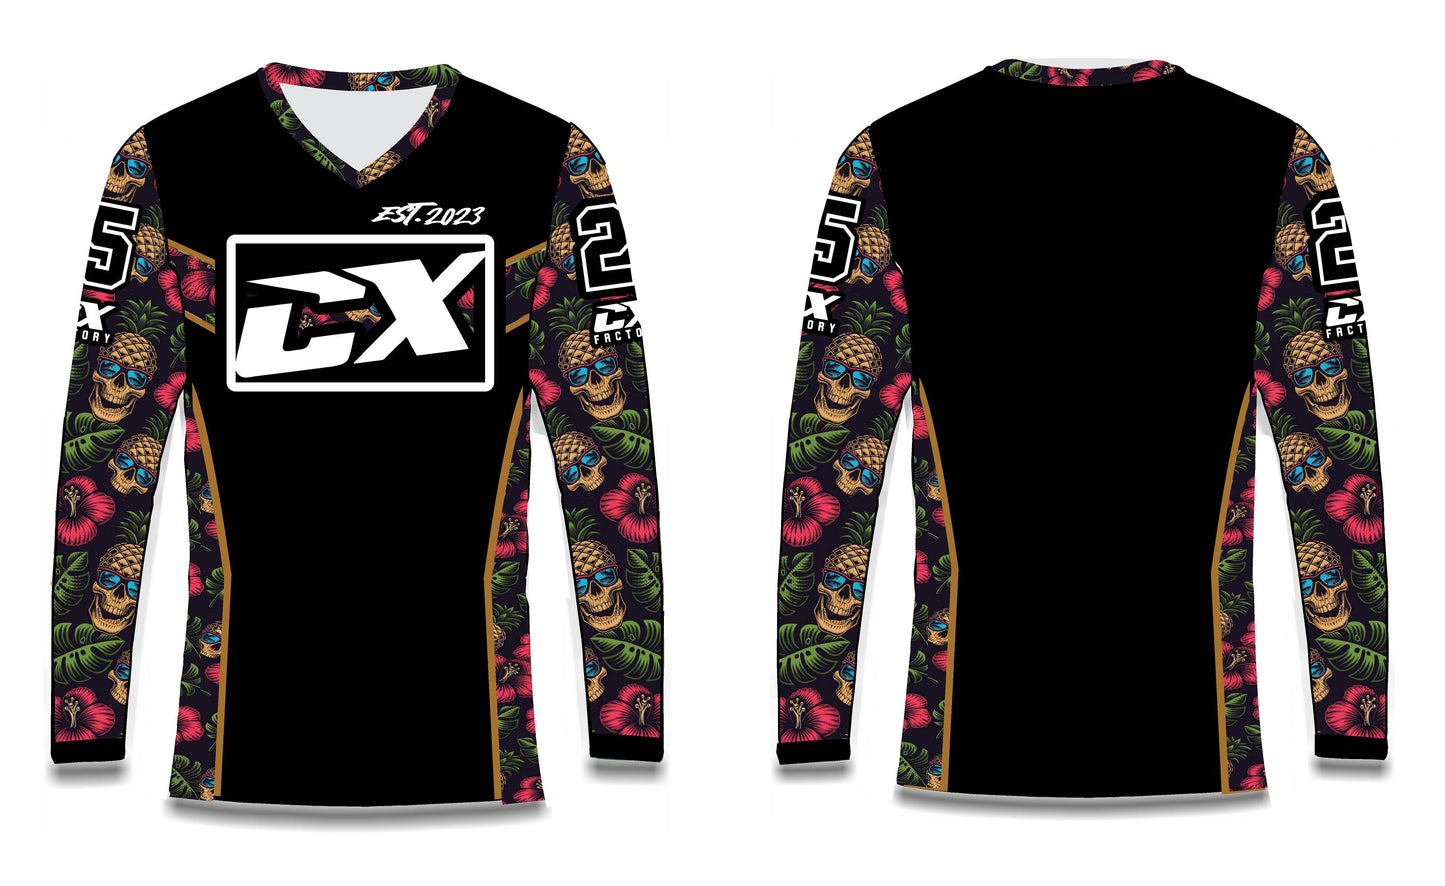 CX Factory Classy Misfit Jersey - Pineapple Express